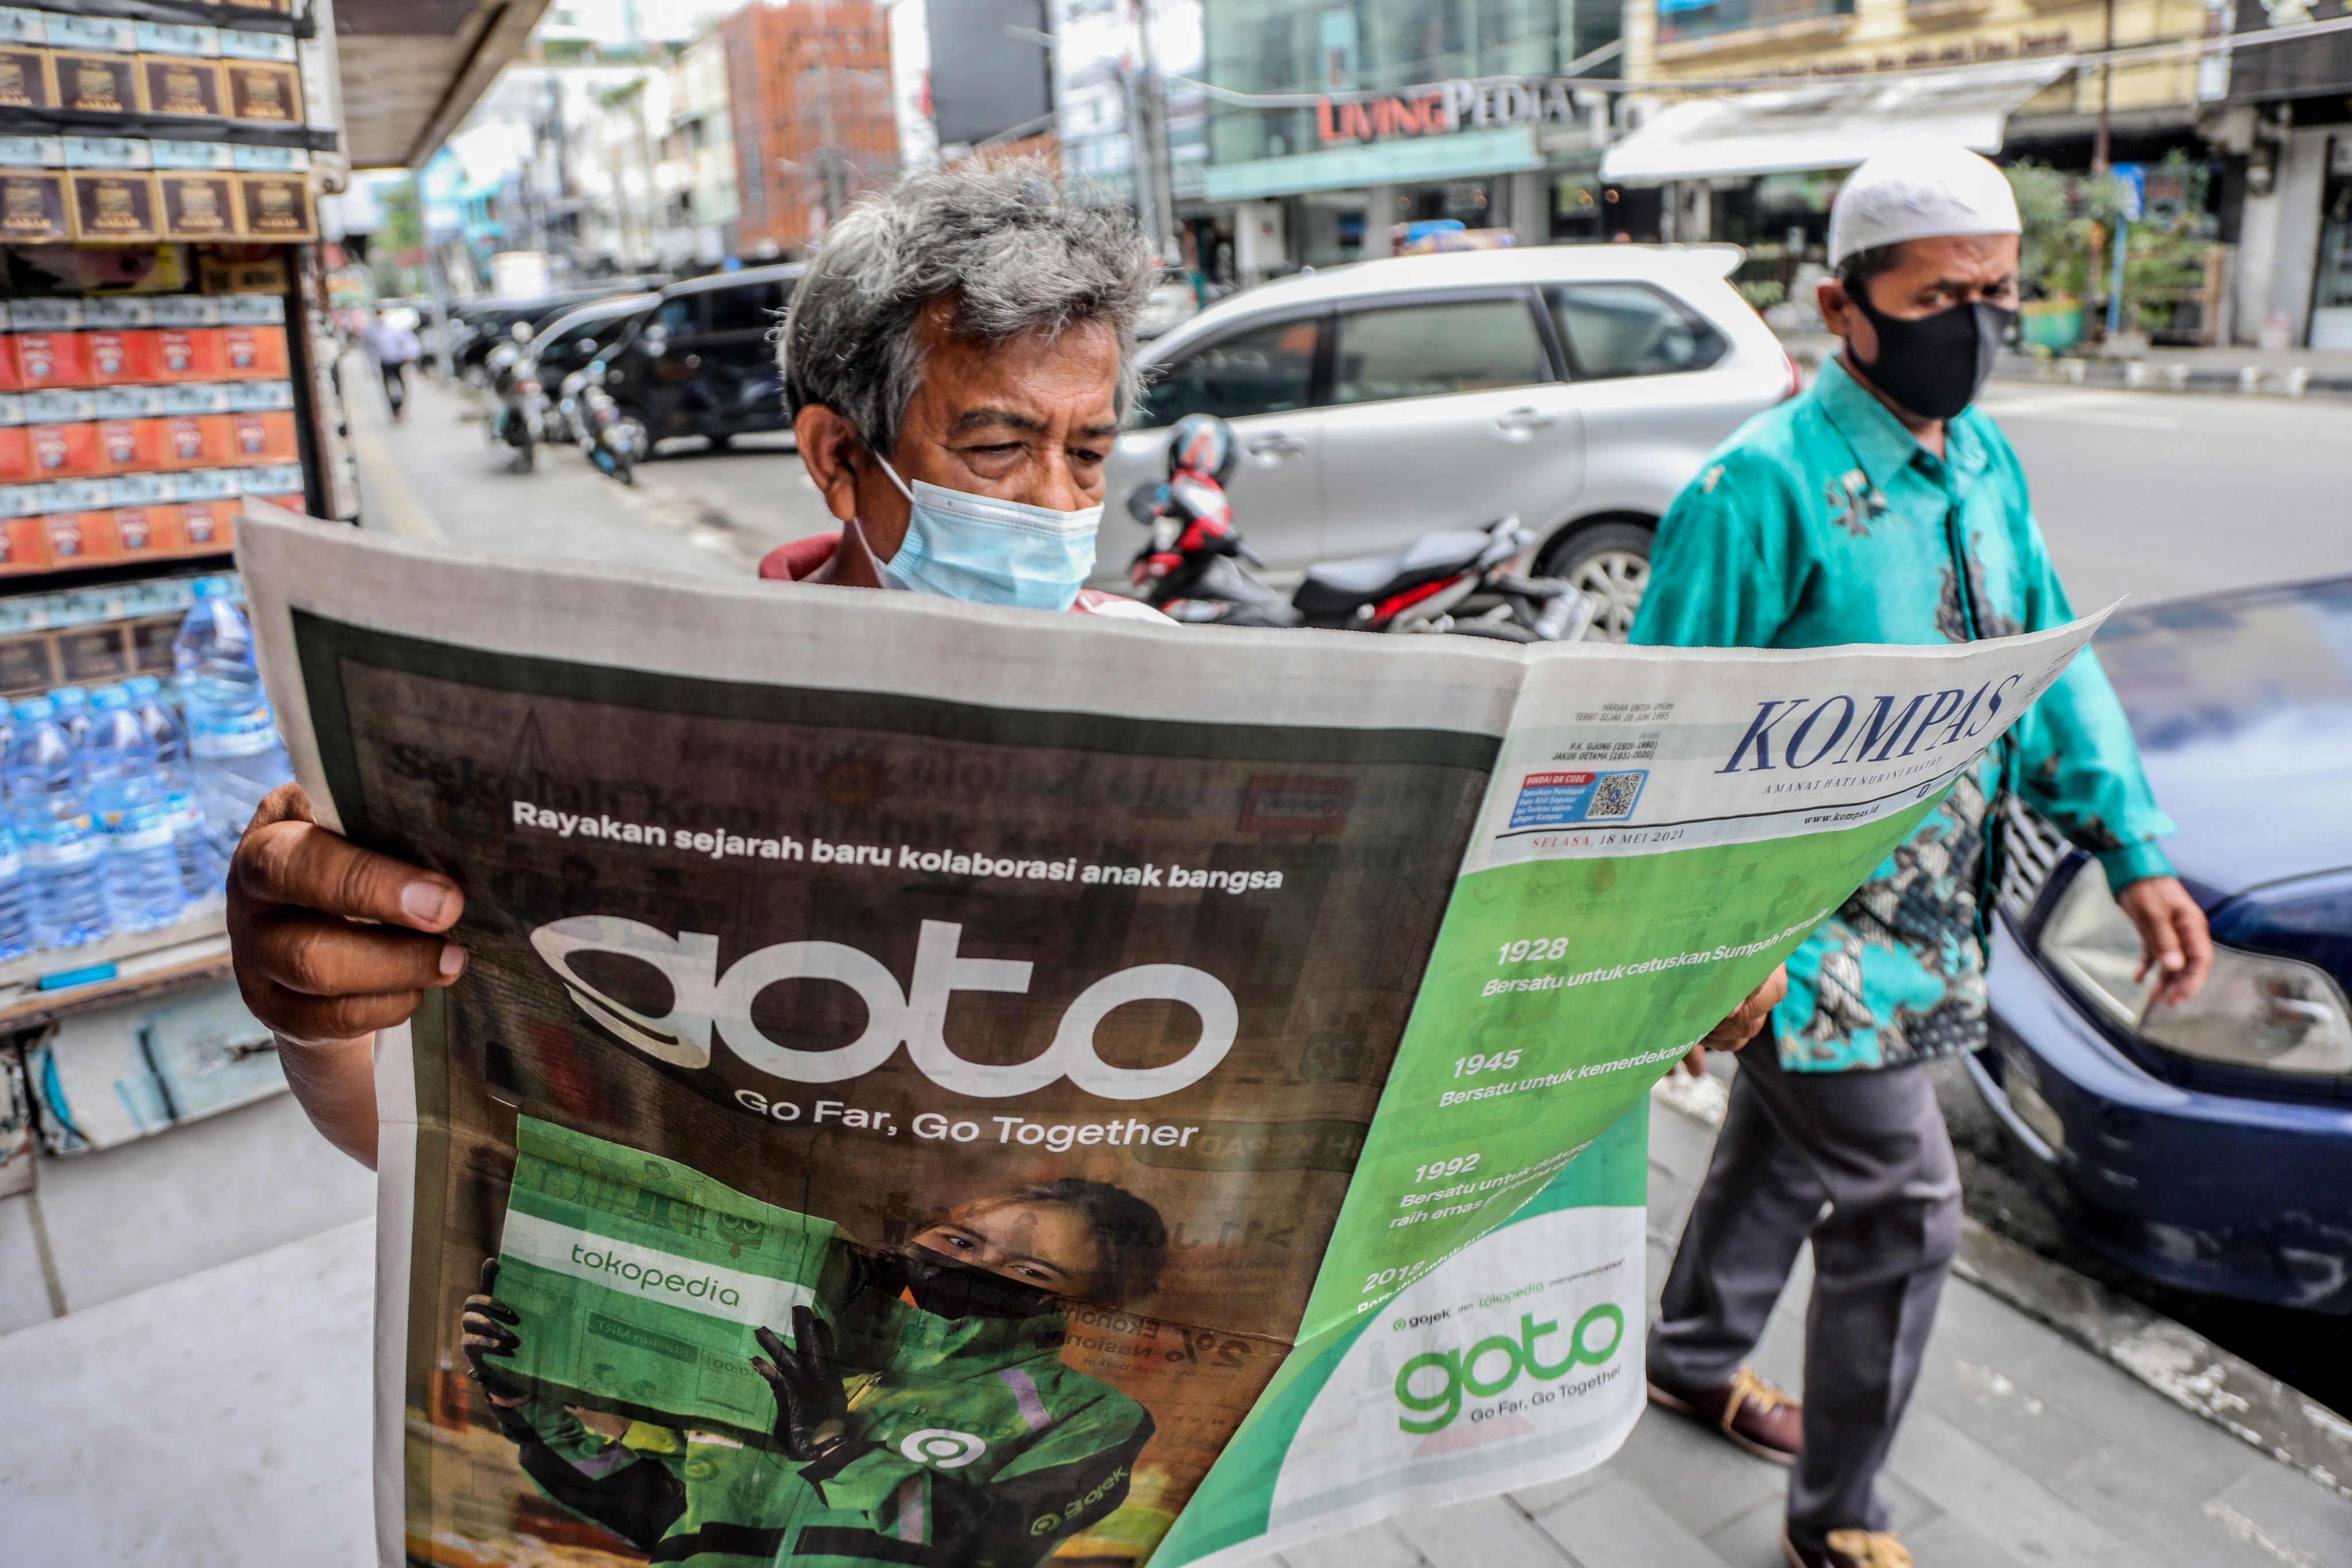 A man reads a newspaper with an advertisement of the Gojek-Tokopedia merger in Medan, Indonesia, on May 18. The resulting multibillion-dollar company, GoTo Group, is an emerging player in Southeast Asia’s fintech space. Photo: EPA-EFE